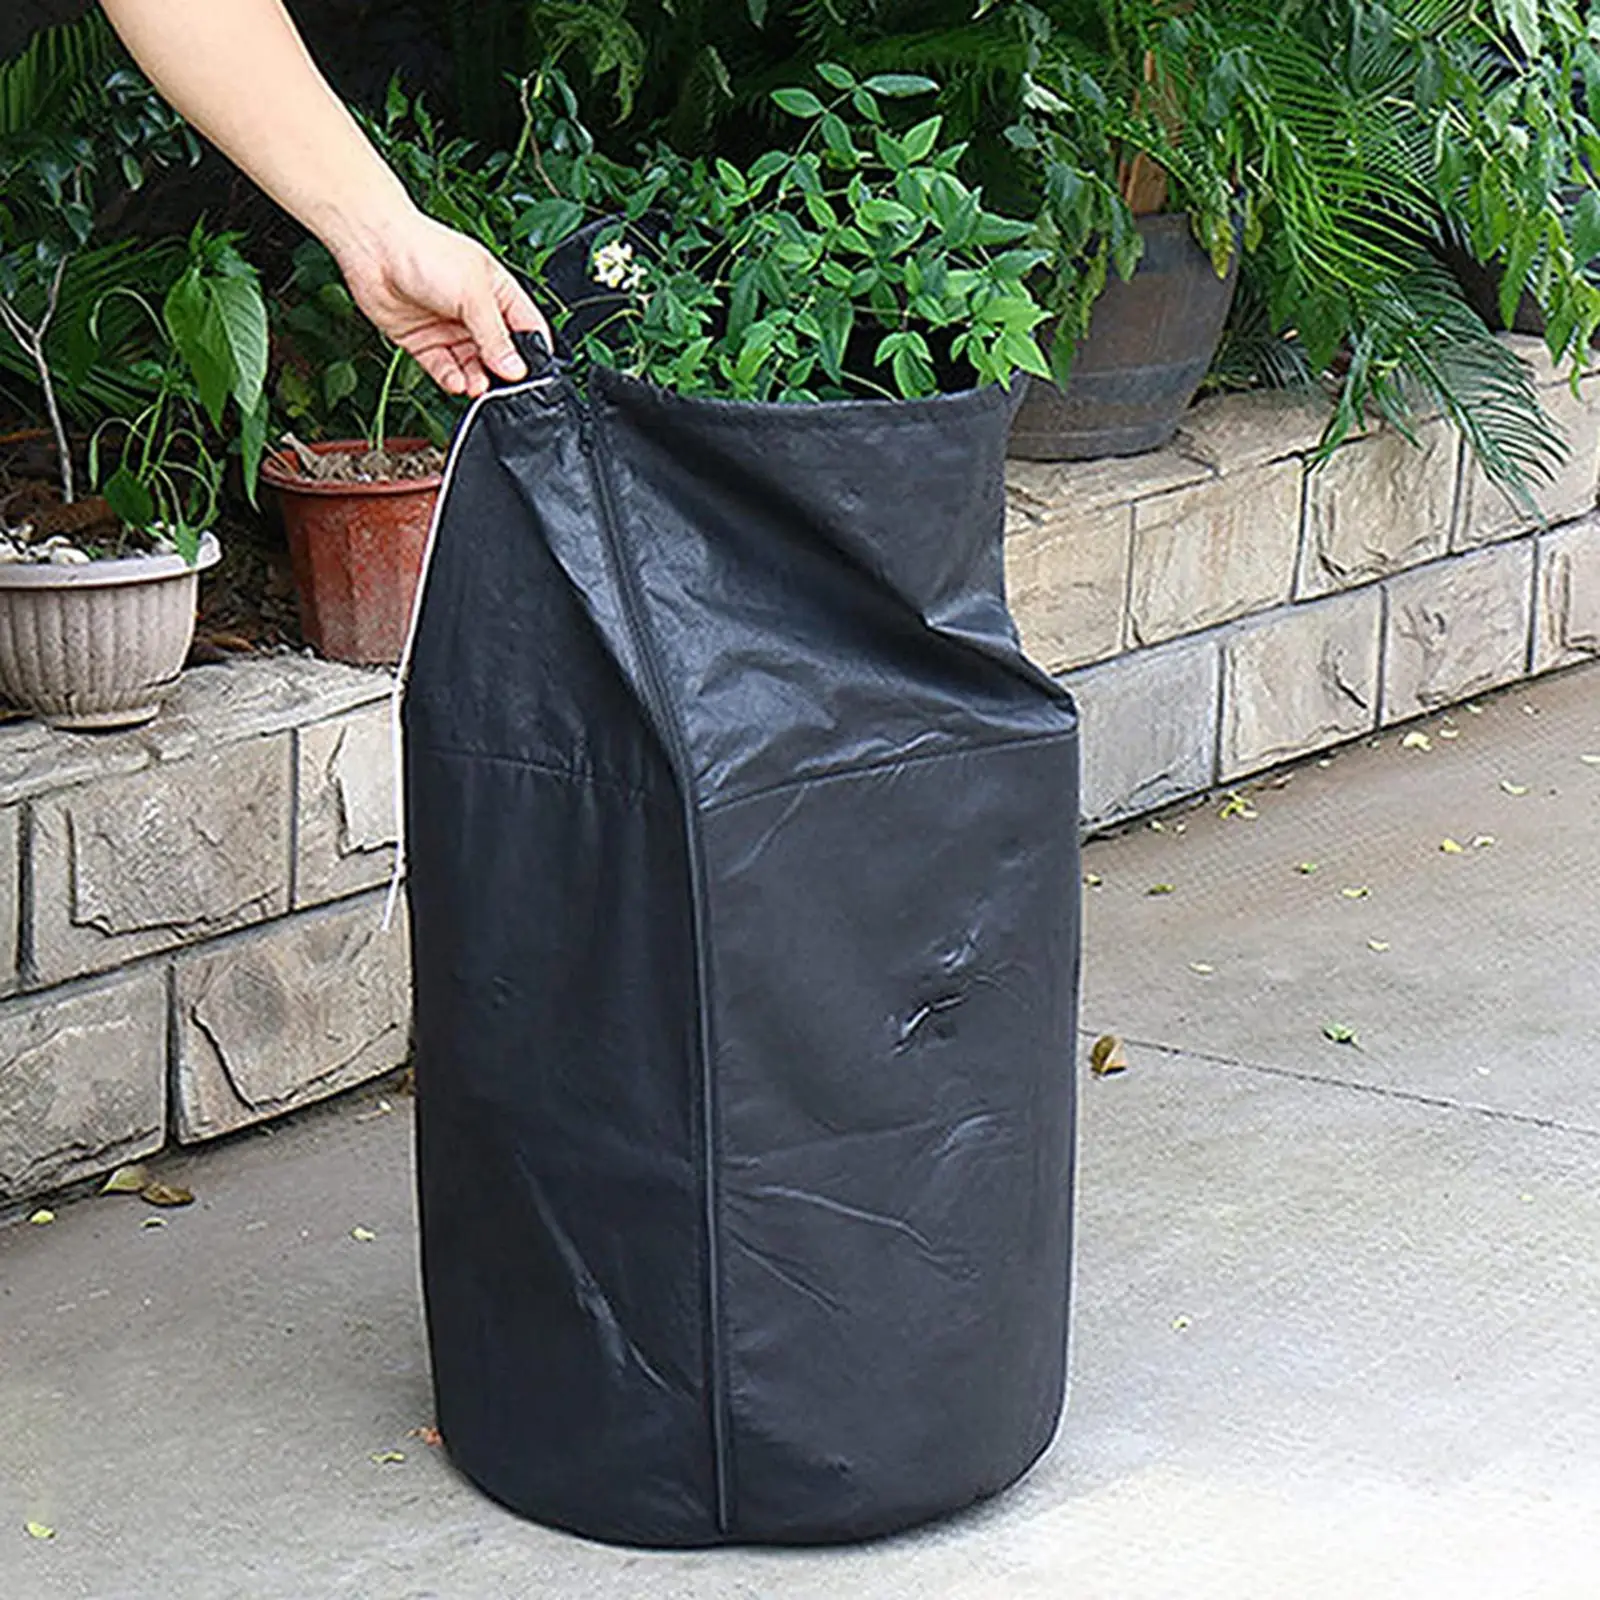 Planter Freeze Cover Protection Frost Protection Breathable for Backyard